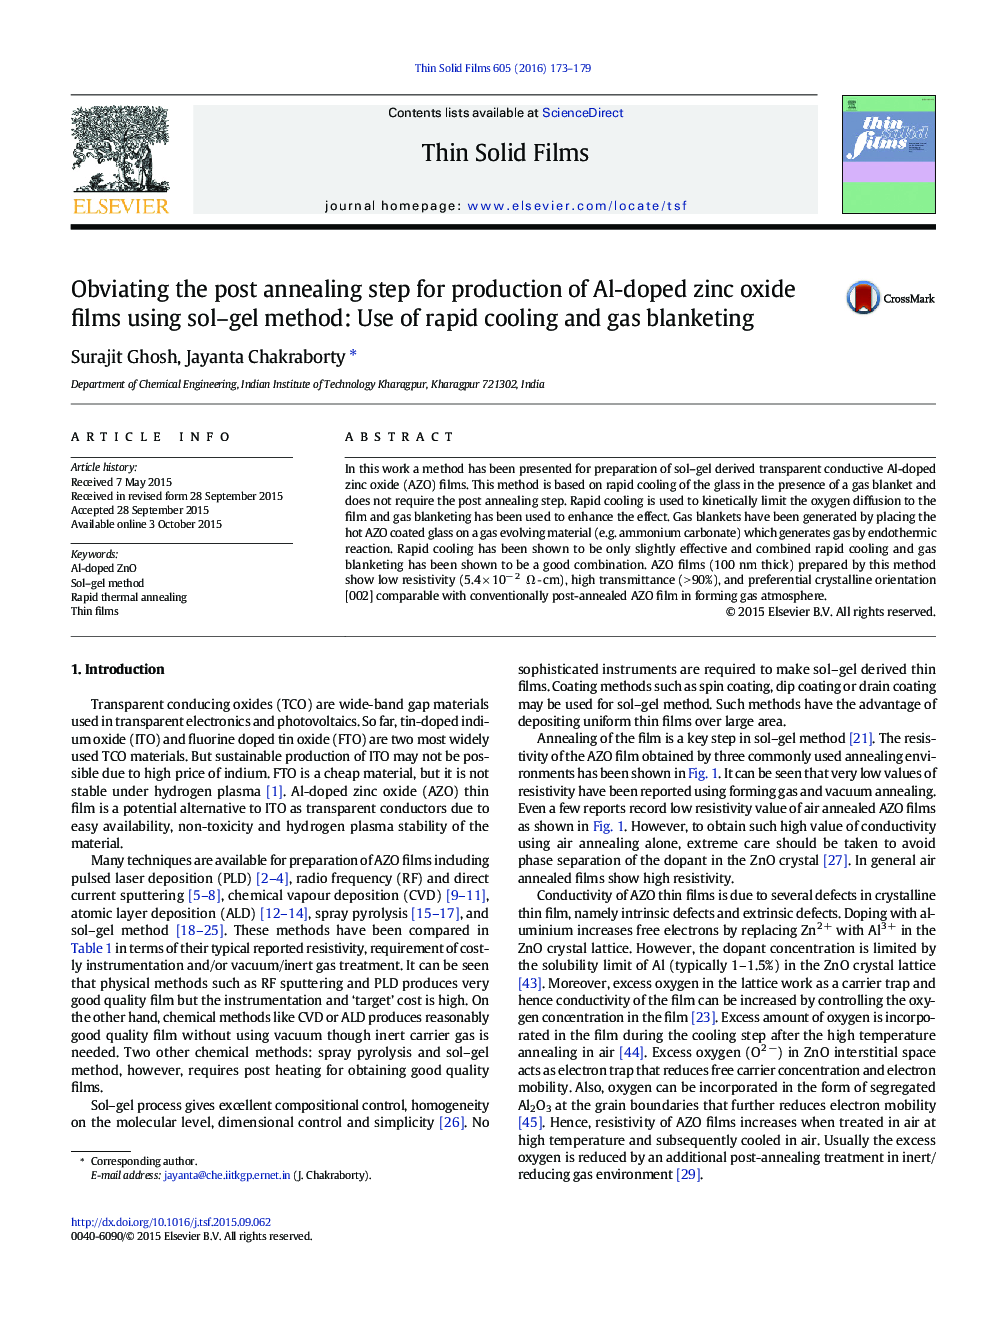 Obviating the post annealing step for production of Al-doped zinc oxide films using sol–gel method: Use of rapid cooling and gas blanketing